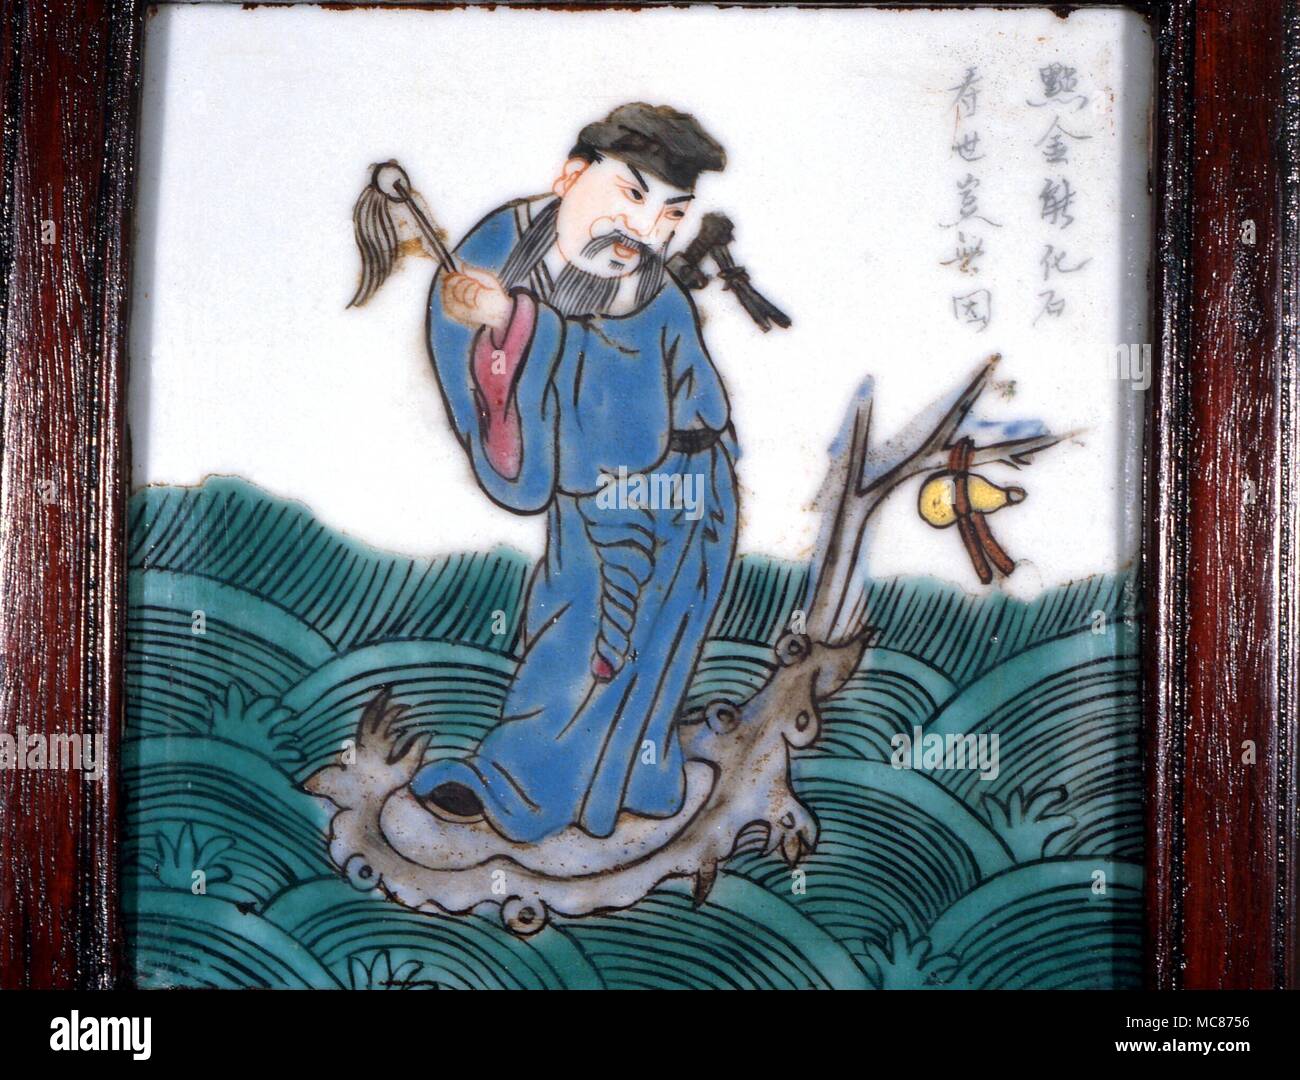 Taoism - One of the Taoist 'Eight Immortals- (Pa Hsien). Lu Tung-pin, with his emblem of the fly-brush. Knows all secrets of Taoism, and is patron of Bankers. Worshipped by the sick. Mid-19th century Chinese tile, from a screen Stock Photo